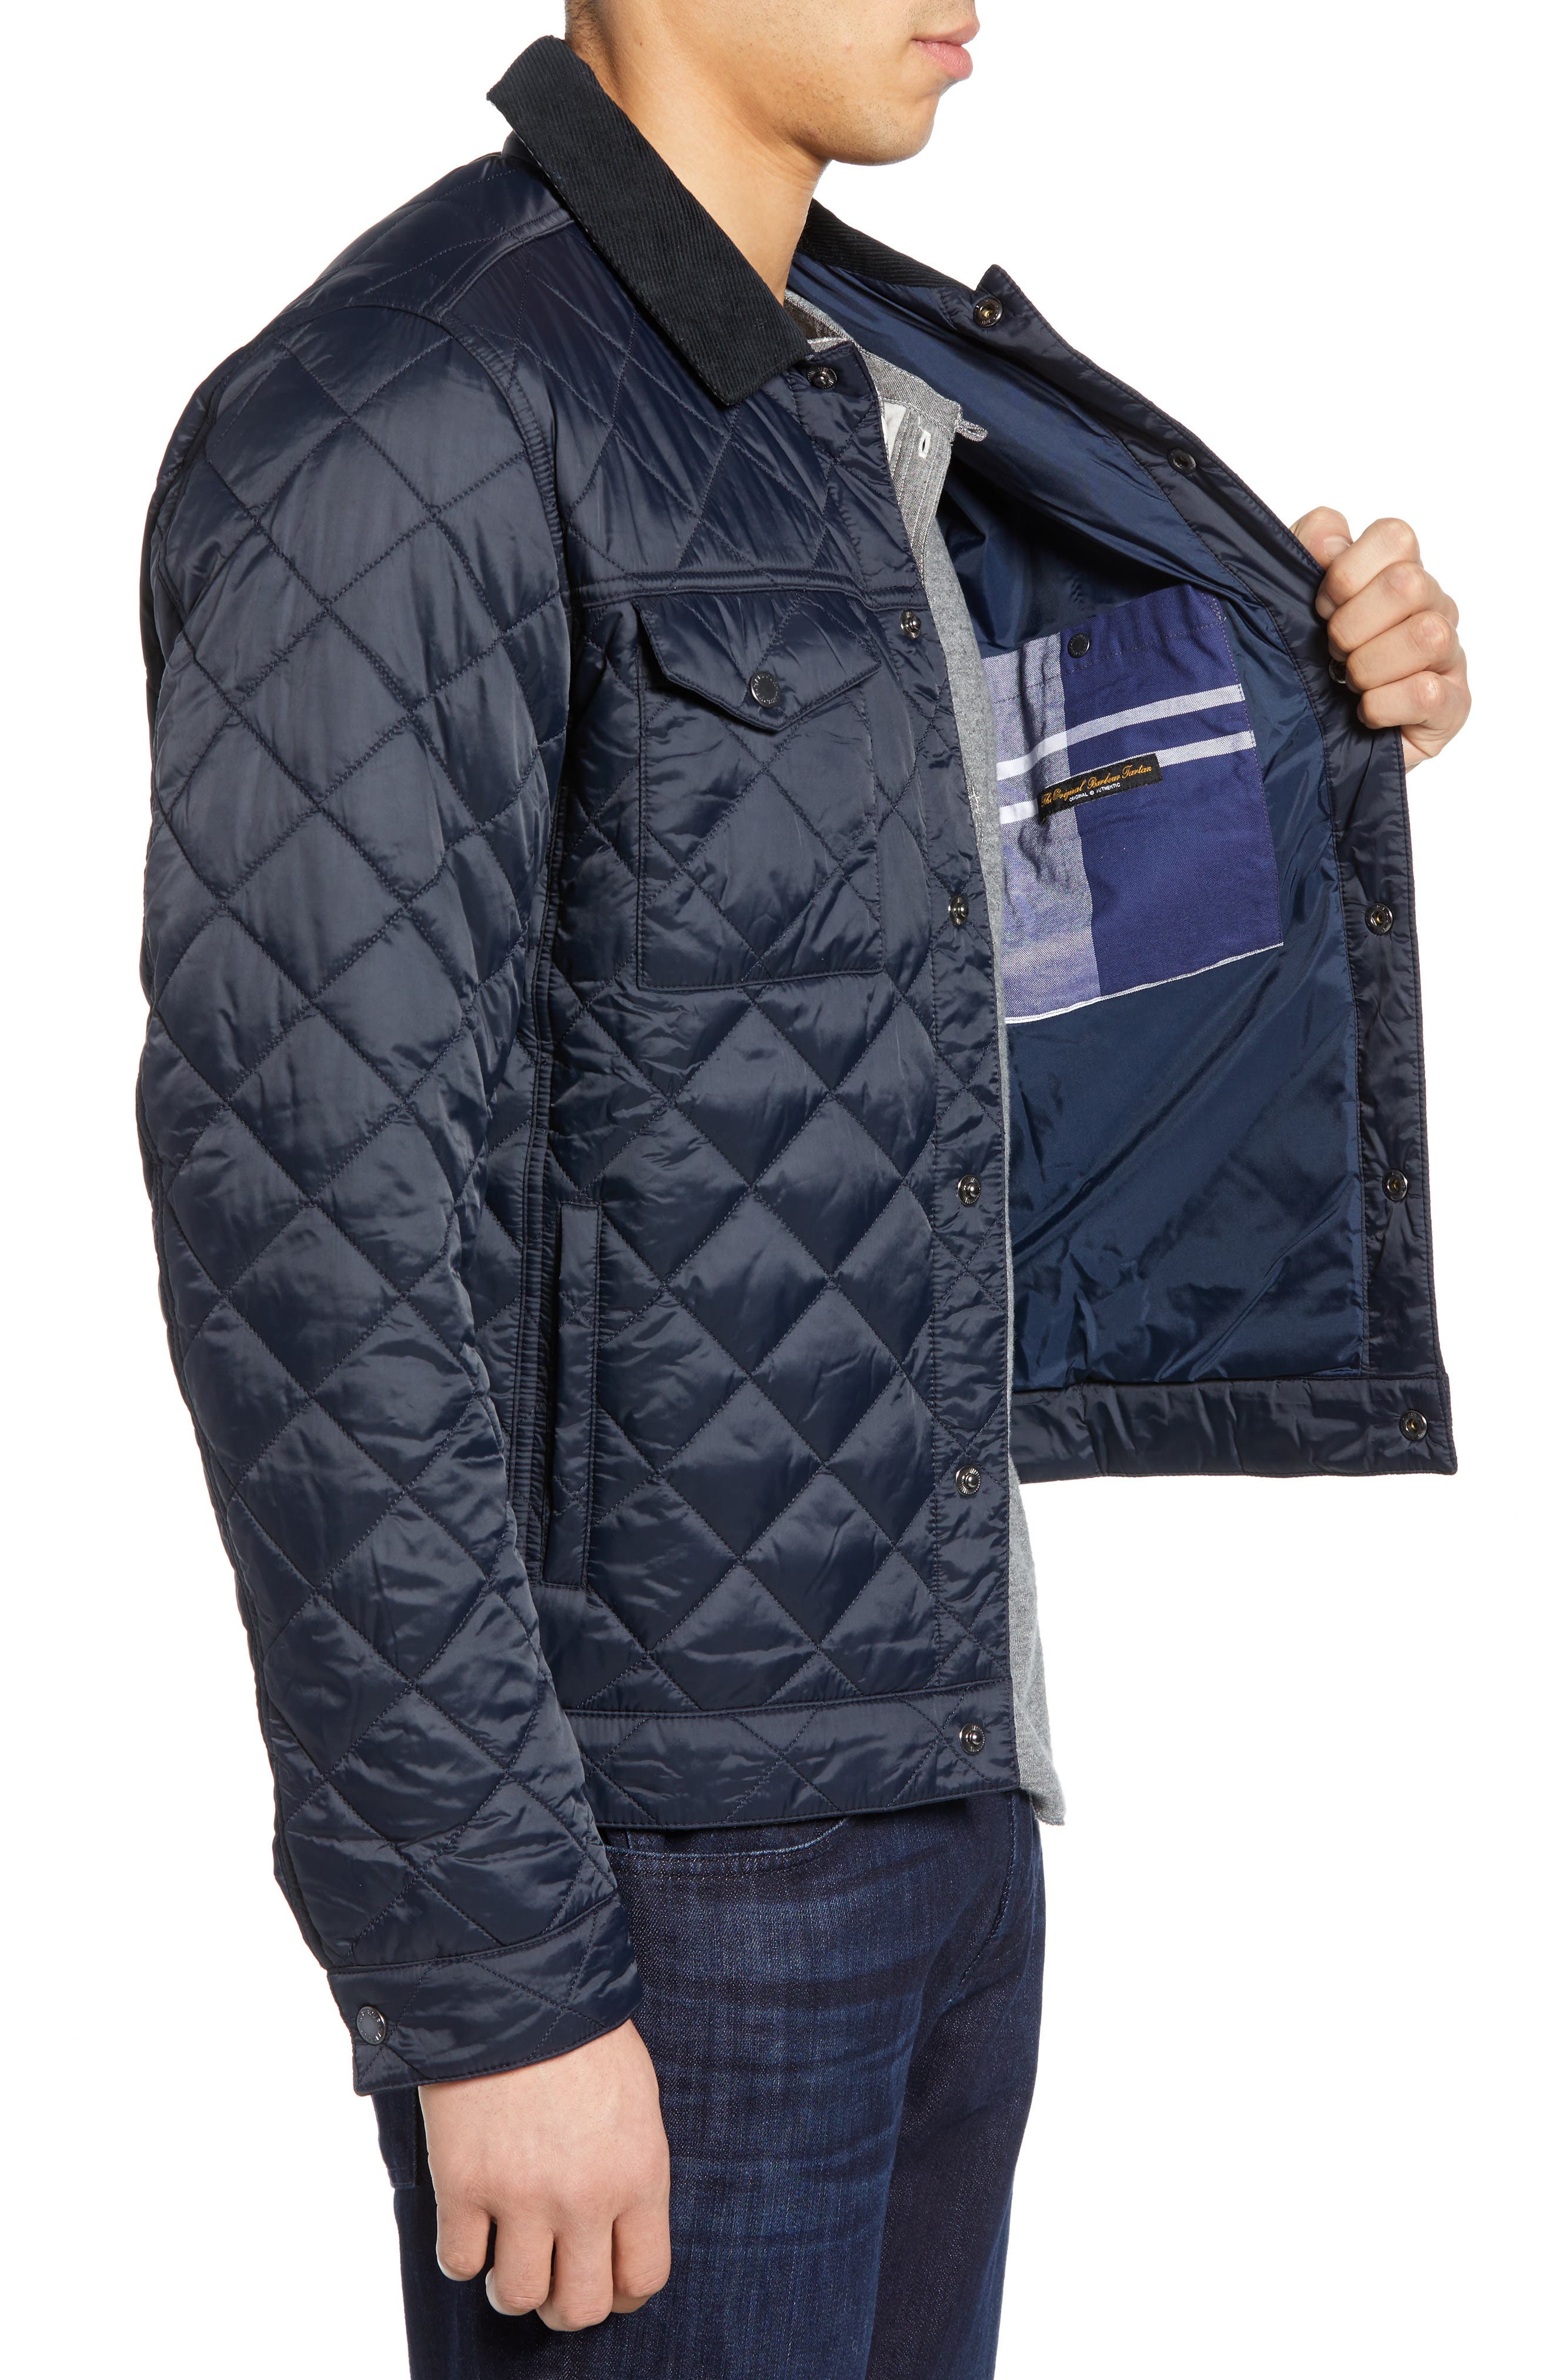 barbour pardarn quilted jacket